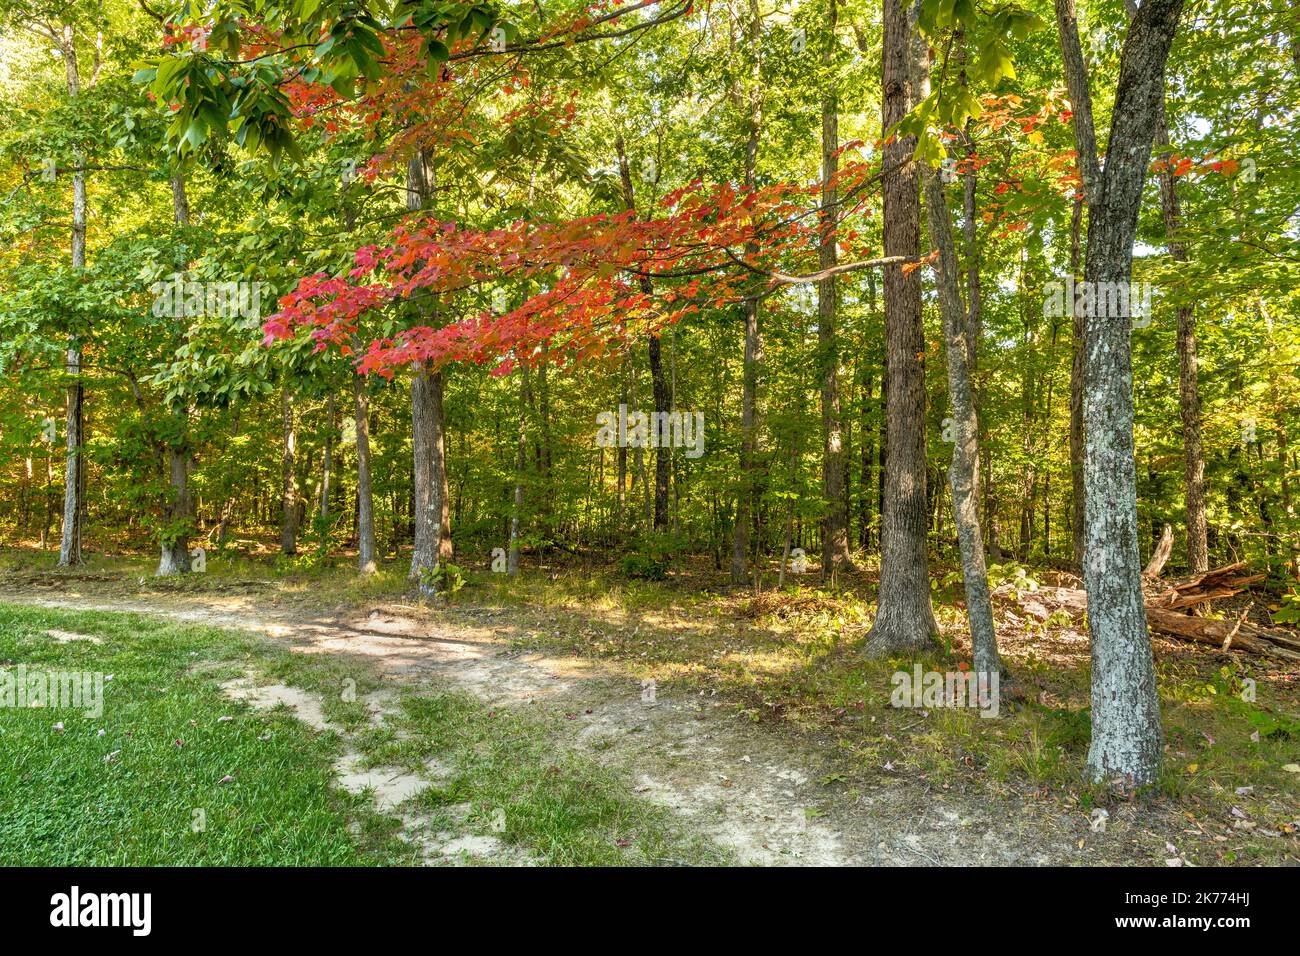 View of the Catoosa National park in Tennessee looking into the woods shows the vibrant, healthy foliage and the peaceful, secluded landscape during a Stock Photo